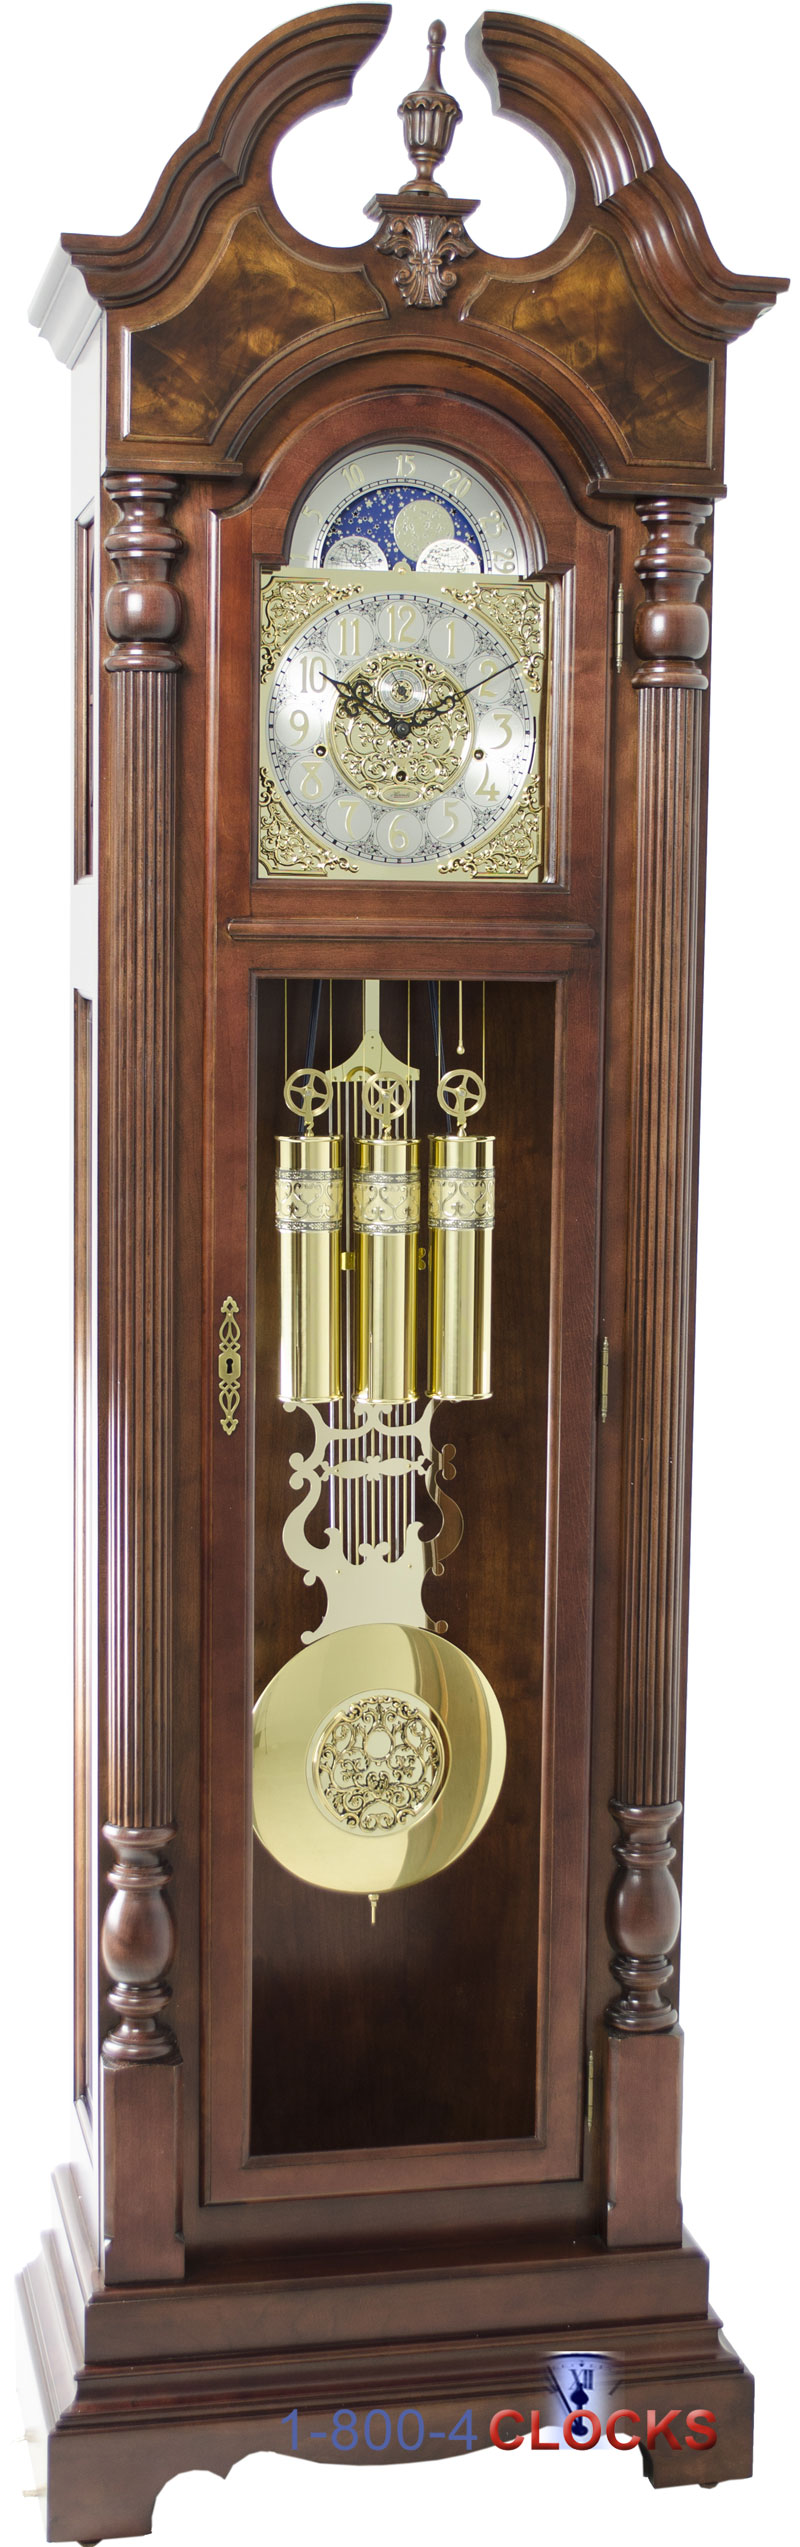 Hermle Blakely Grandfather Clock in Cherry.